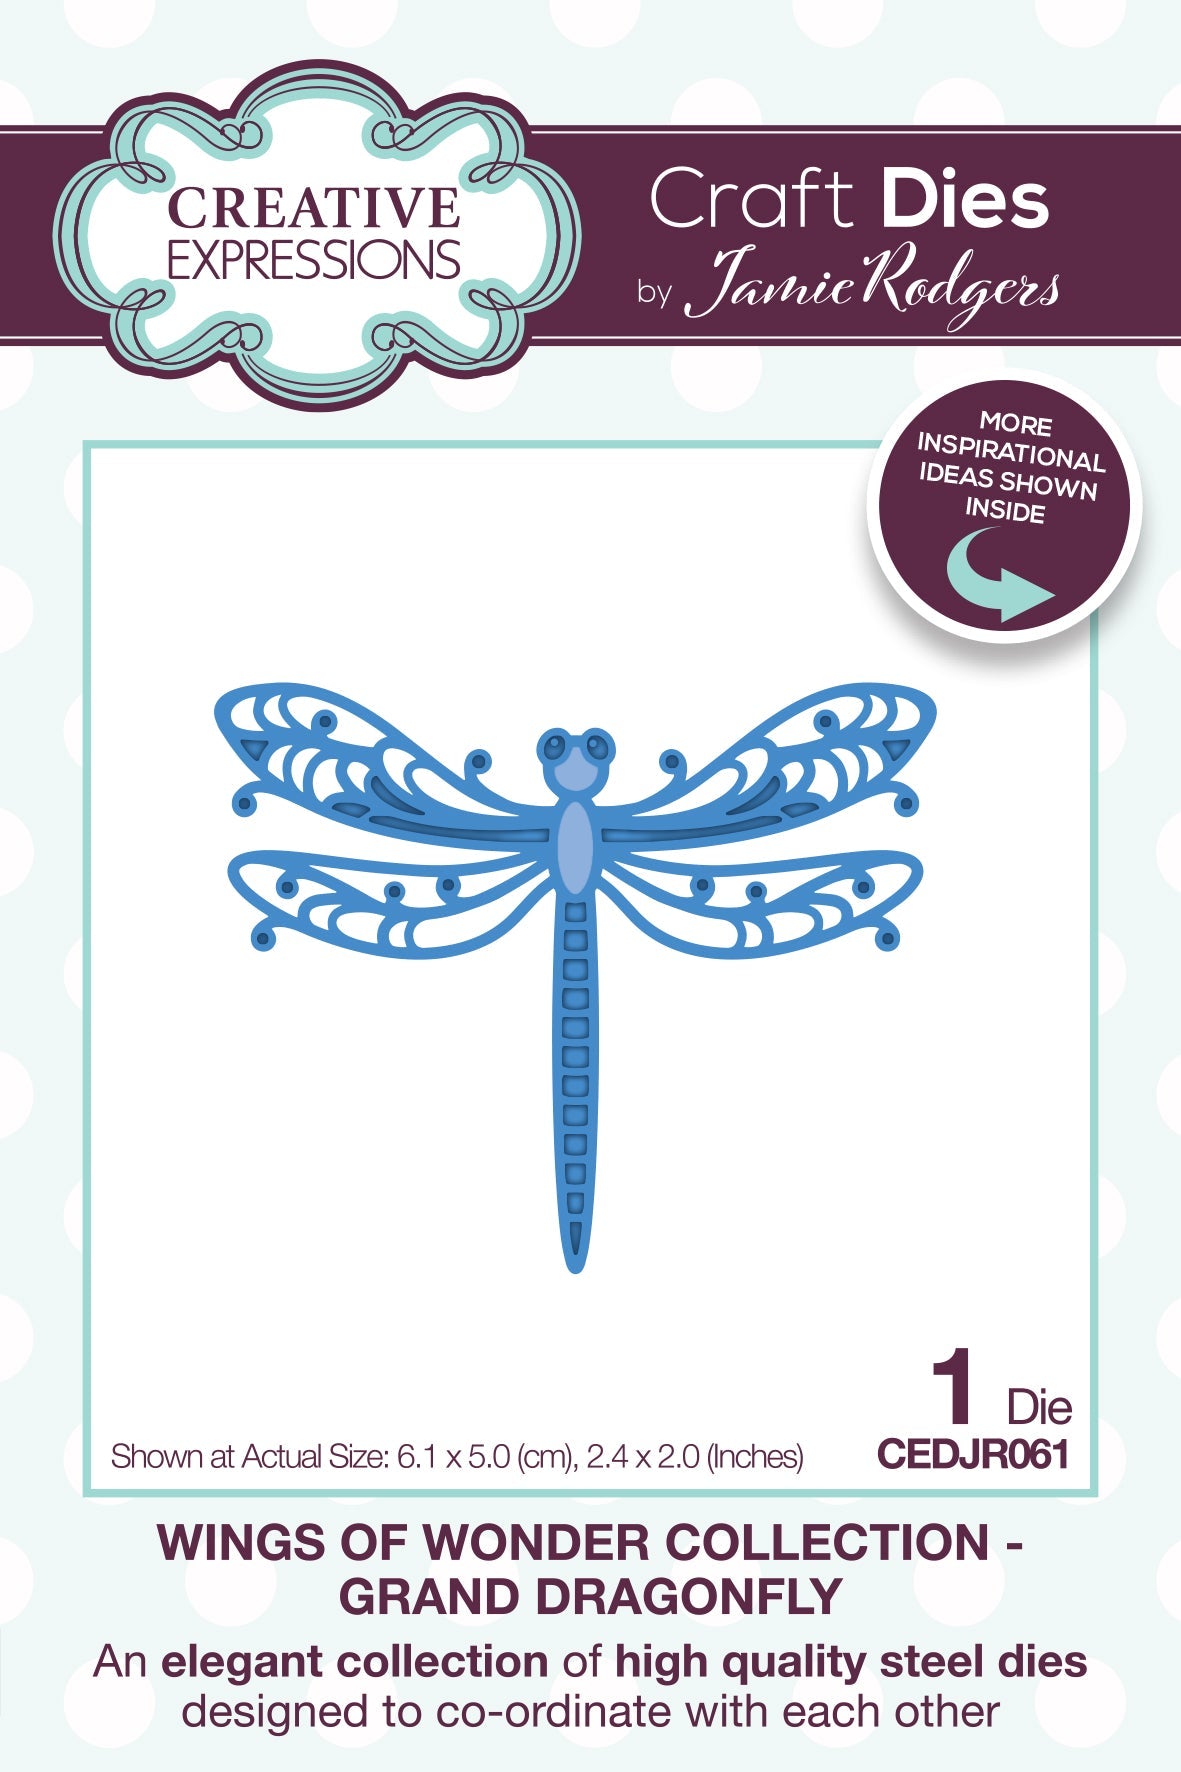 Creative Expressions Jamie Rodgers Grand Dragonfly Craft Die